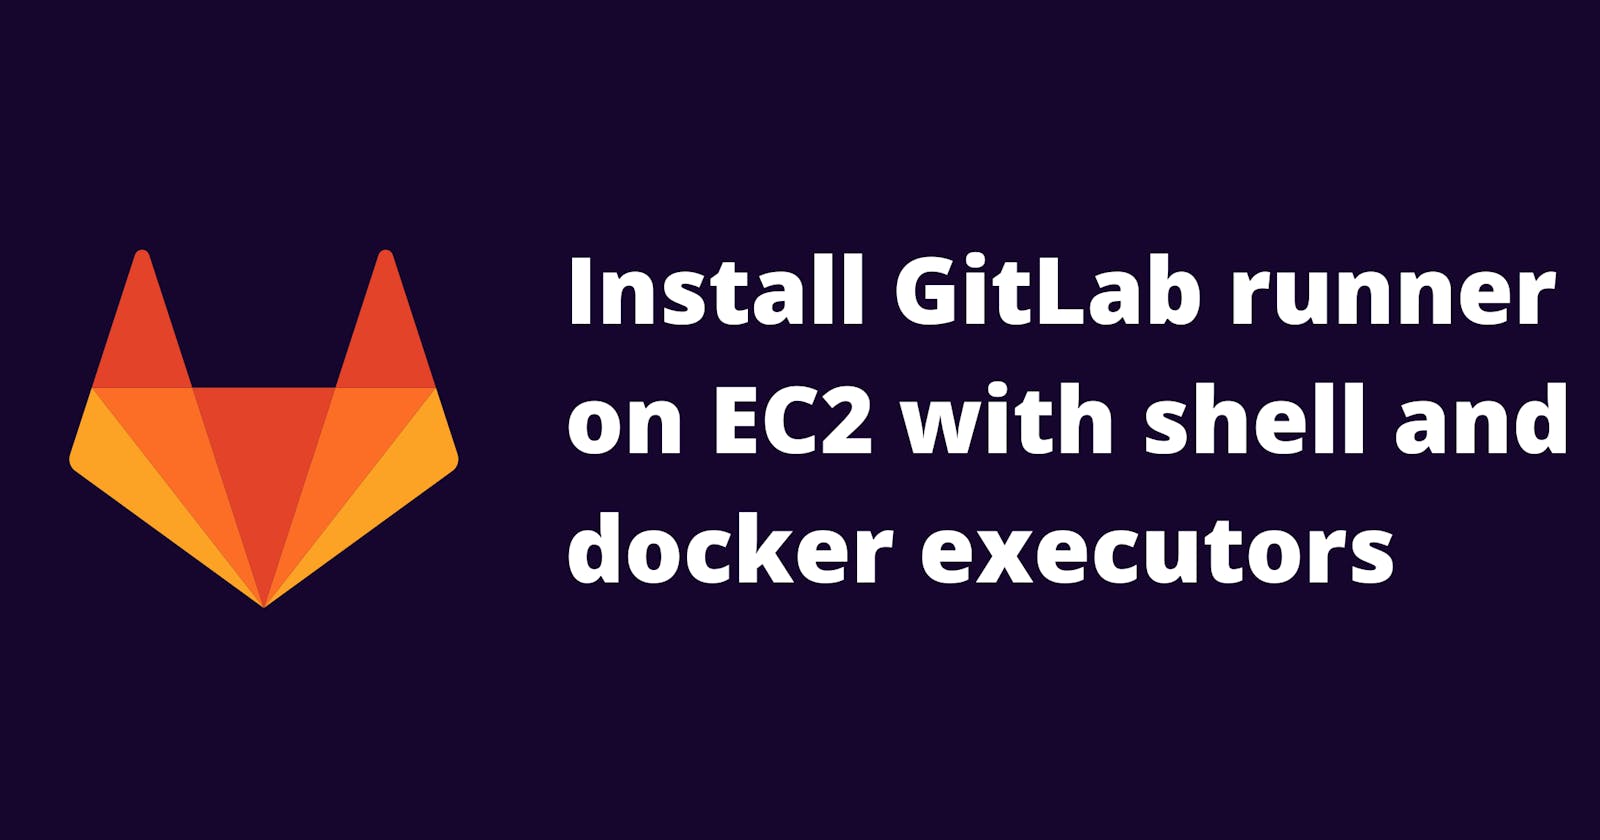 Install GitLab runner on EC2 with shell and docker executors